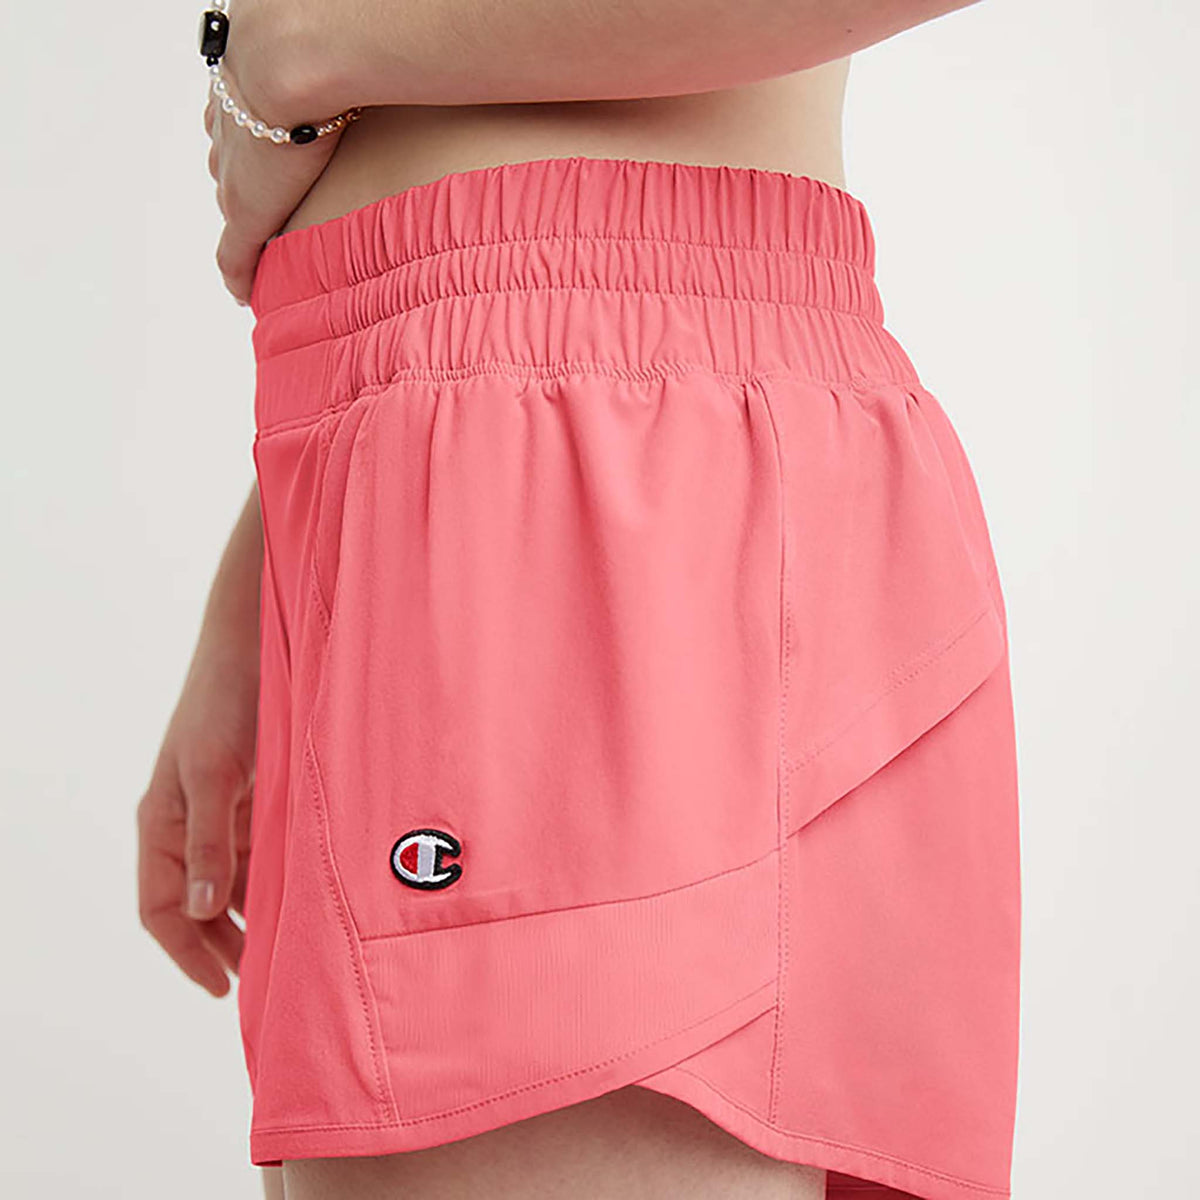 Champion Absolute shorts 4 pouces pinky peach femme taille